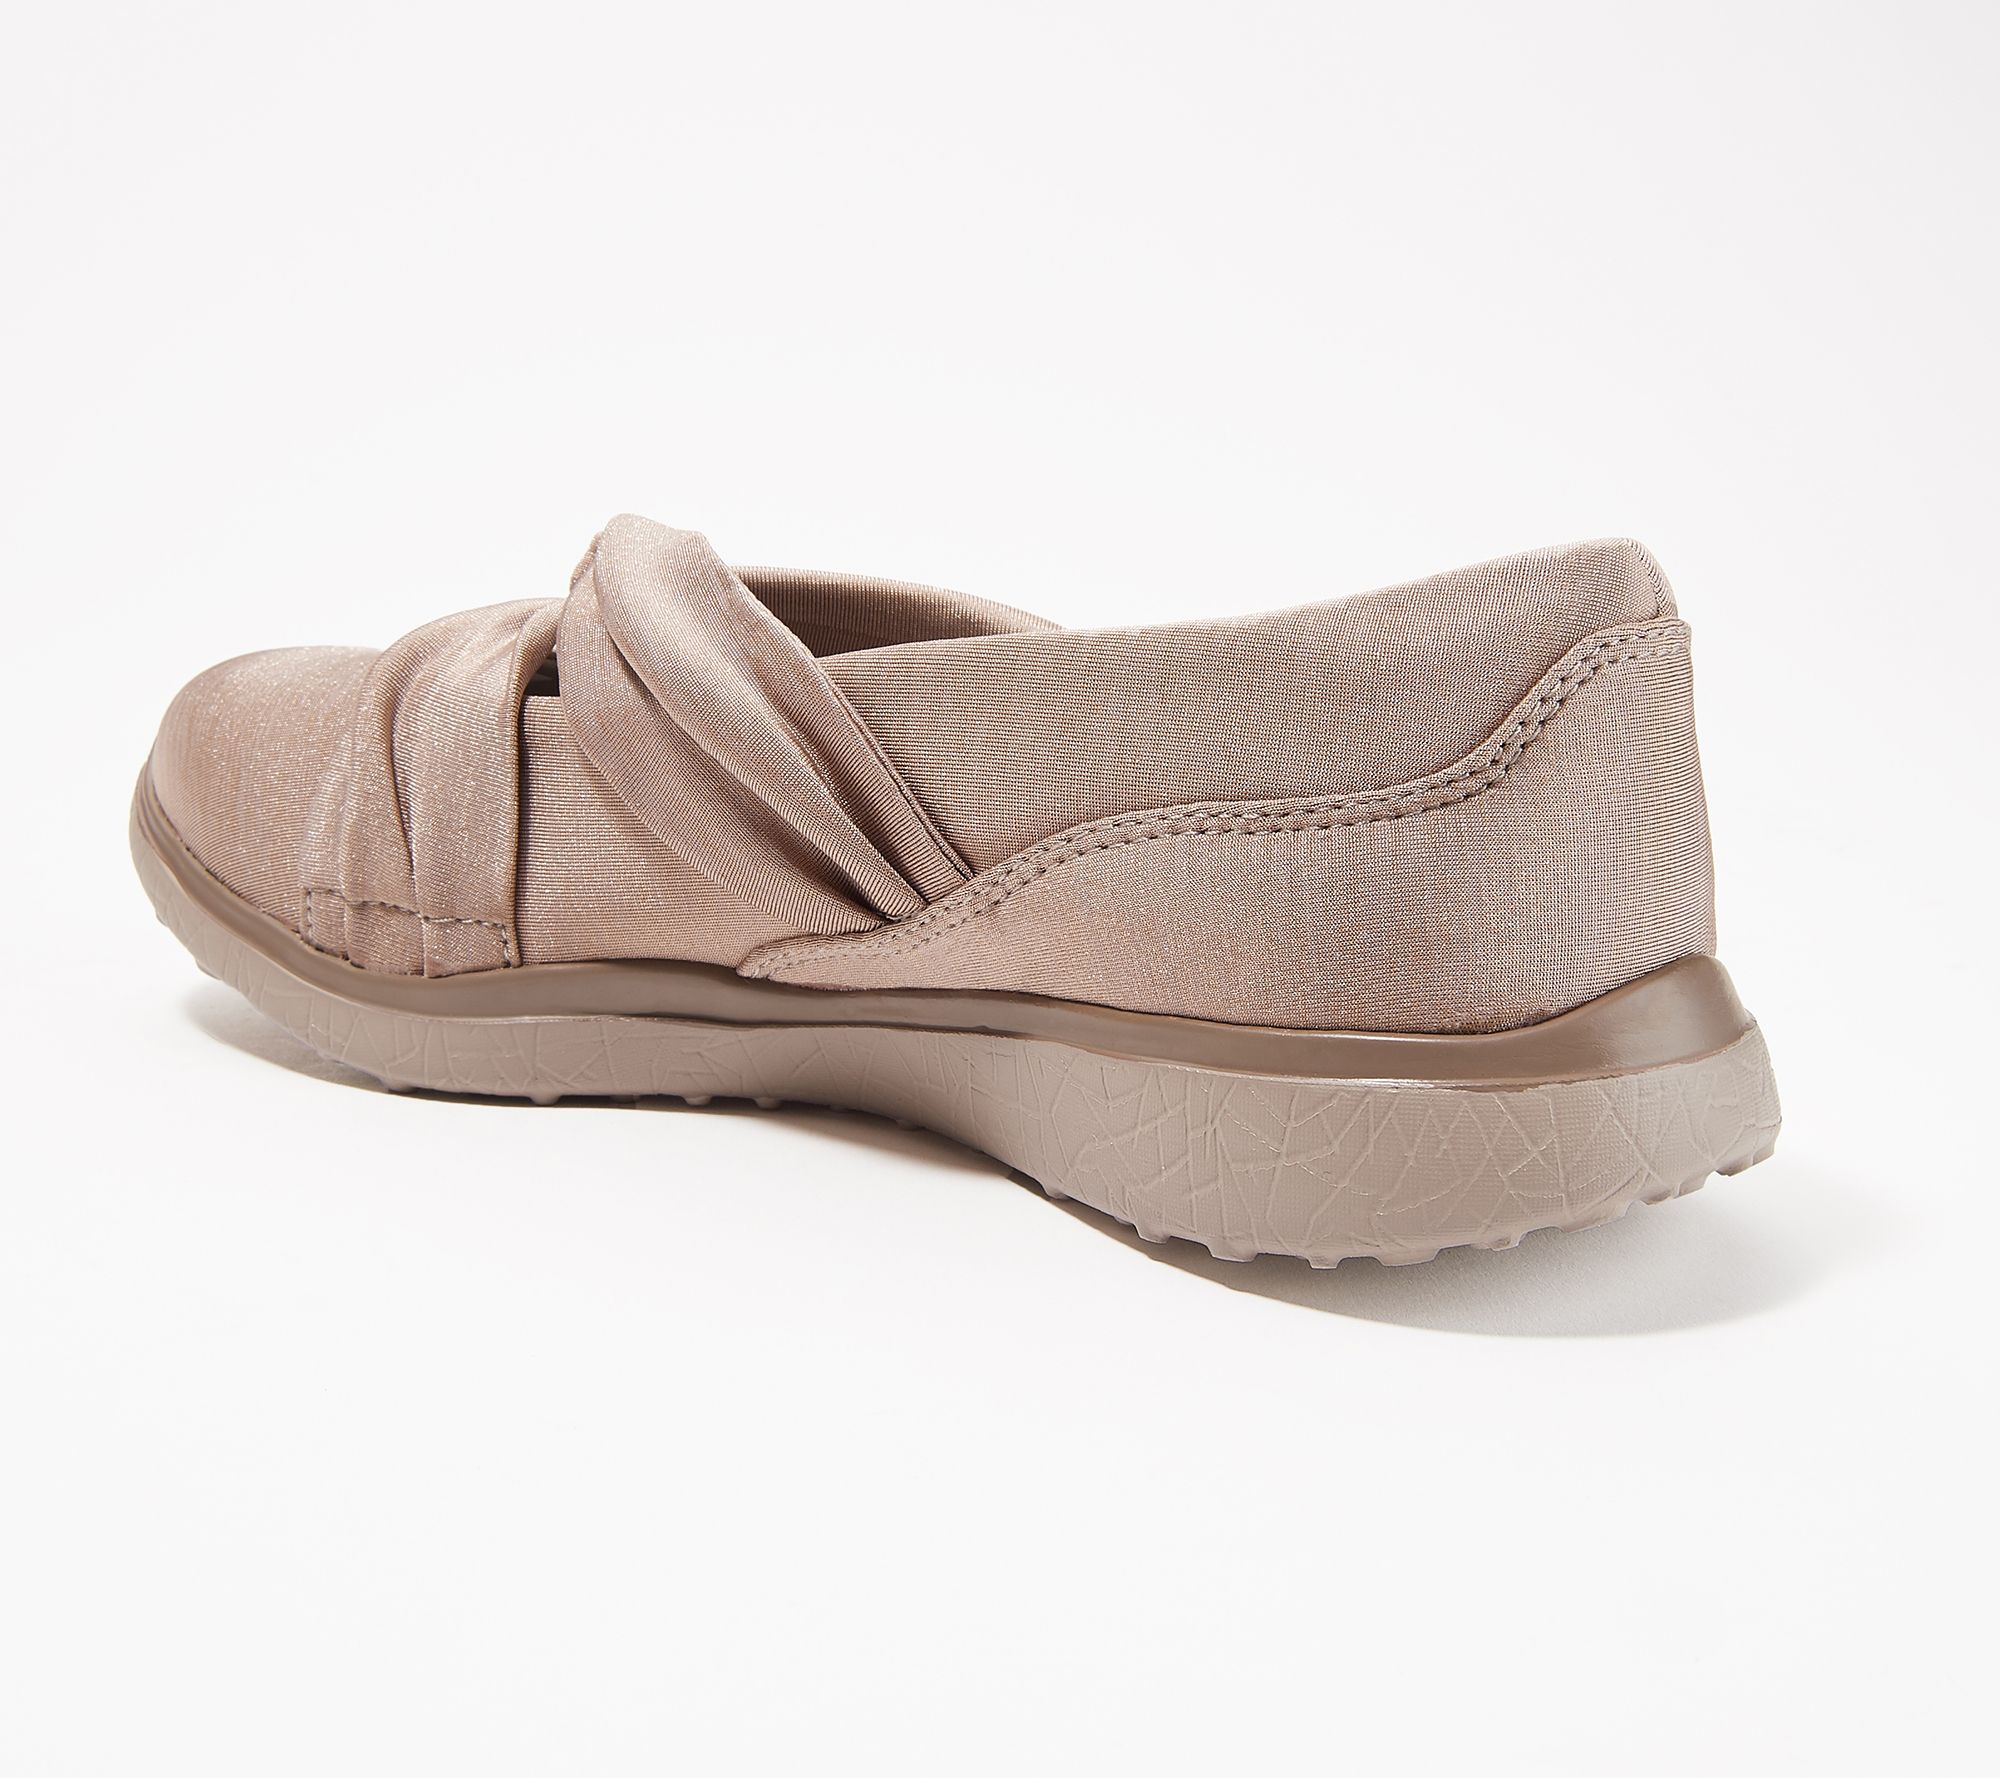 skechers heathered jersey mary janes